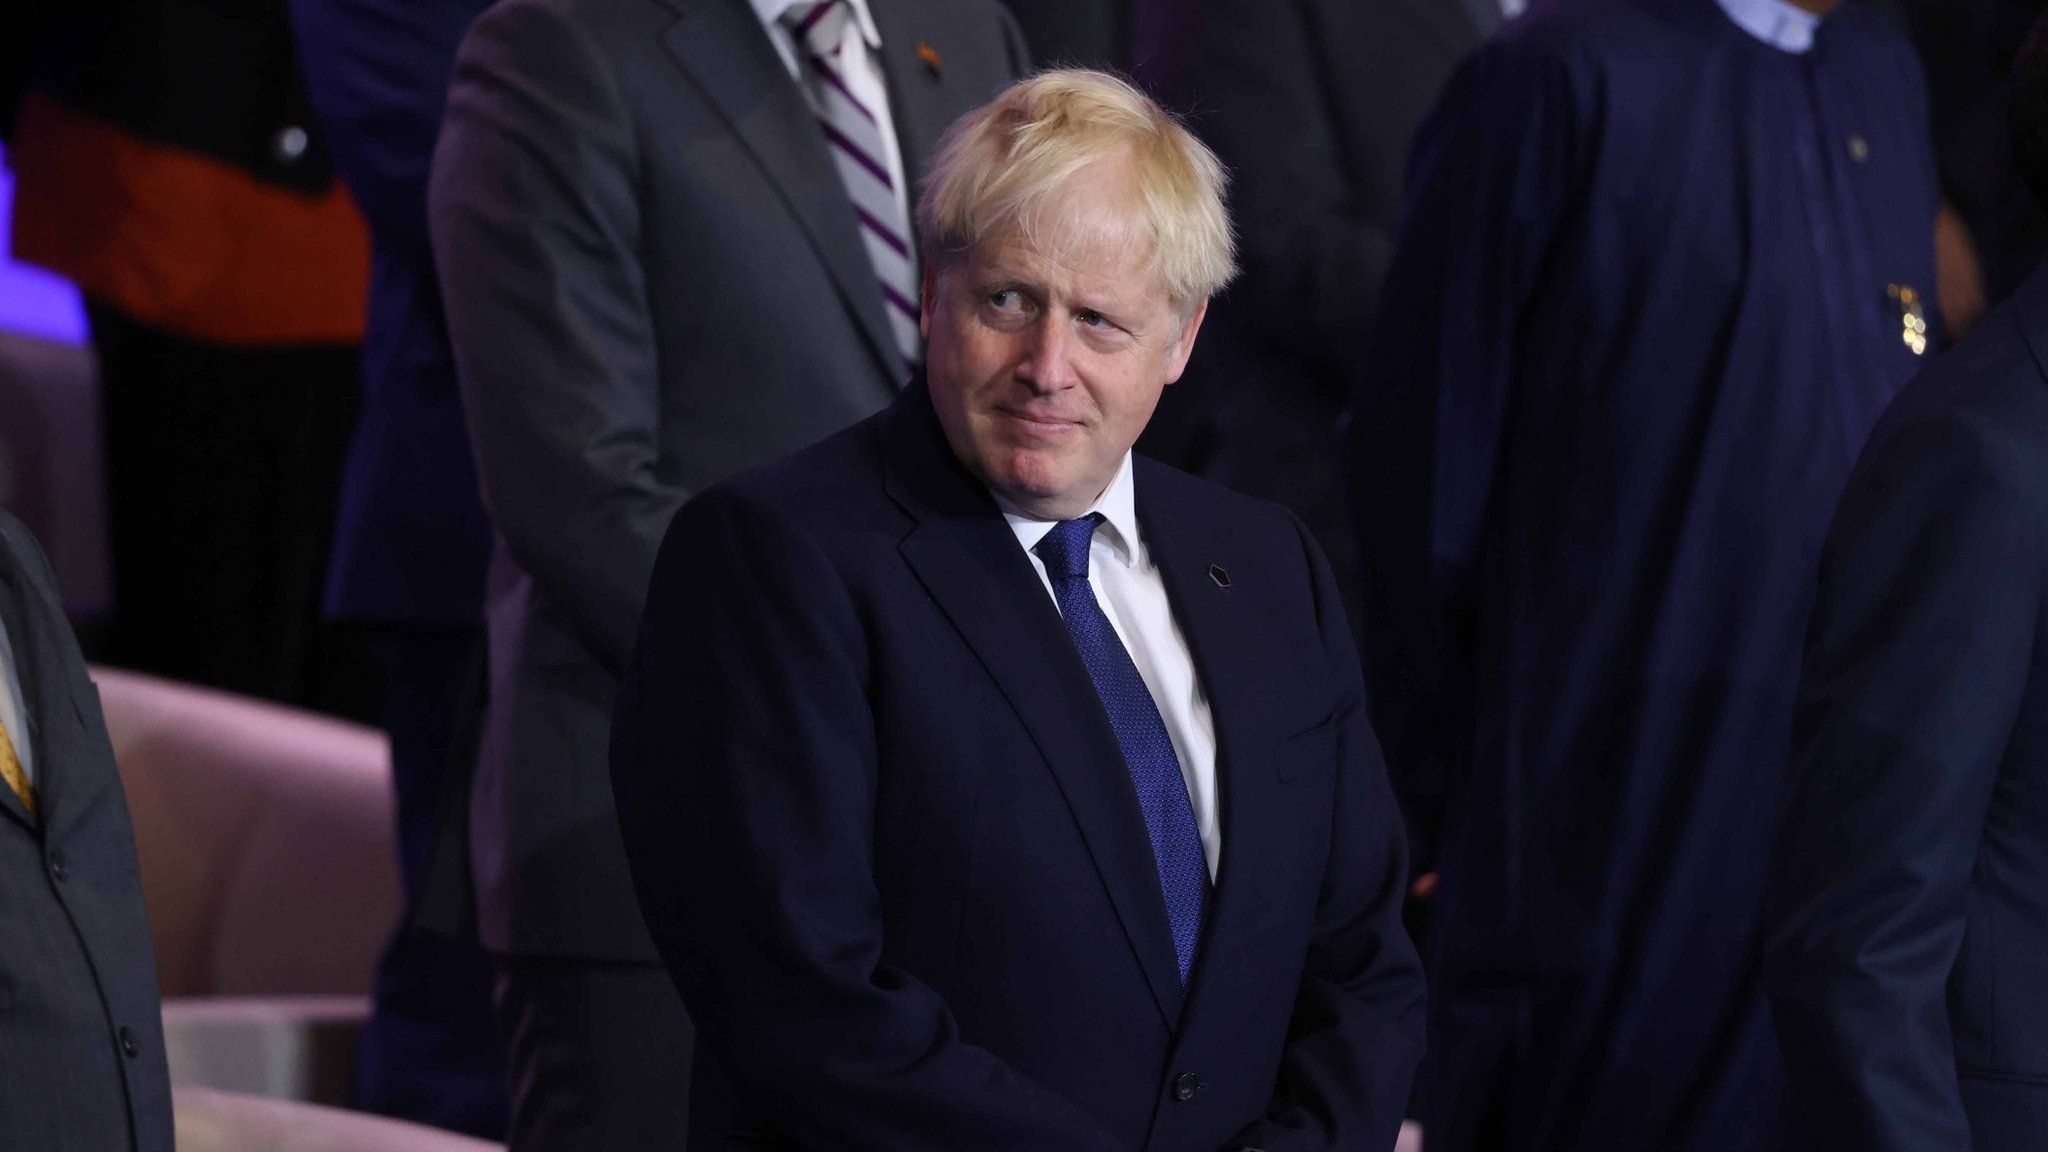 Prime Minister Boris Johnson arrives to attend the opening ceremony of the Commonwealth Heads of Government Meeting (CHOGM), during the royal visit to Rwanda. Picture date: Friday June 24, 2022.